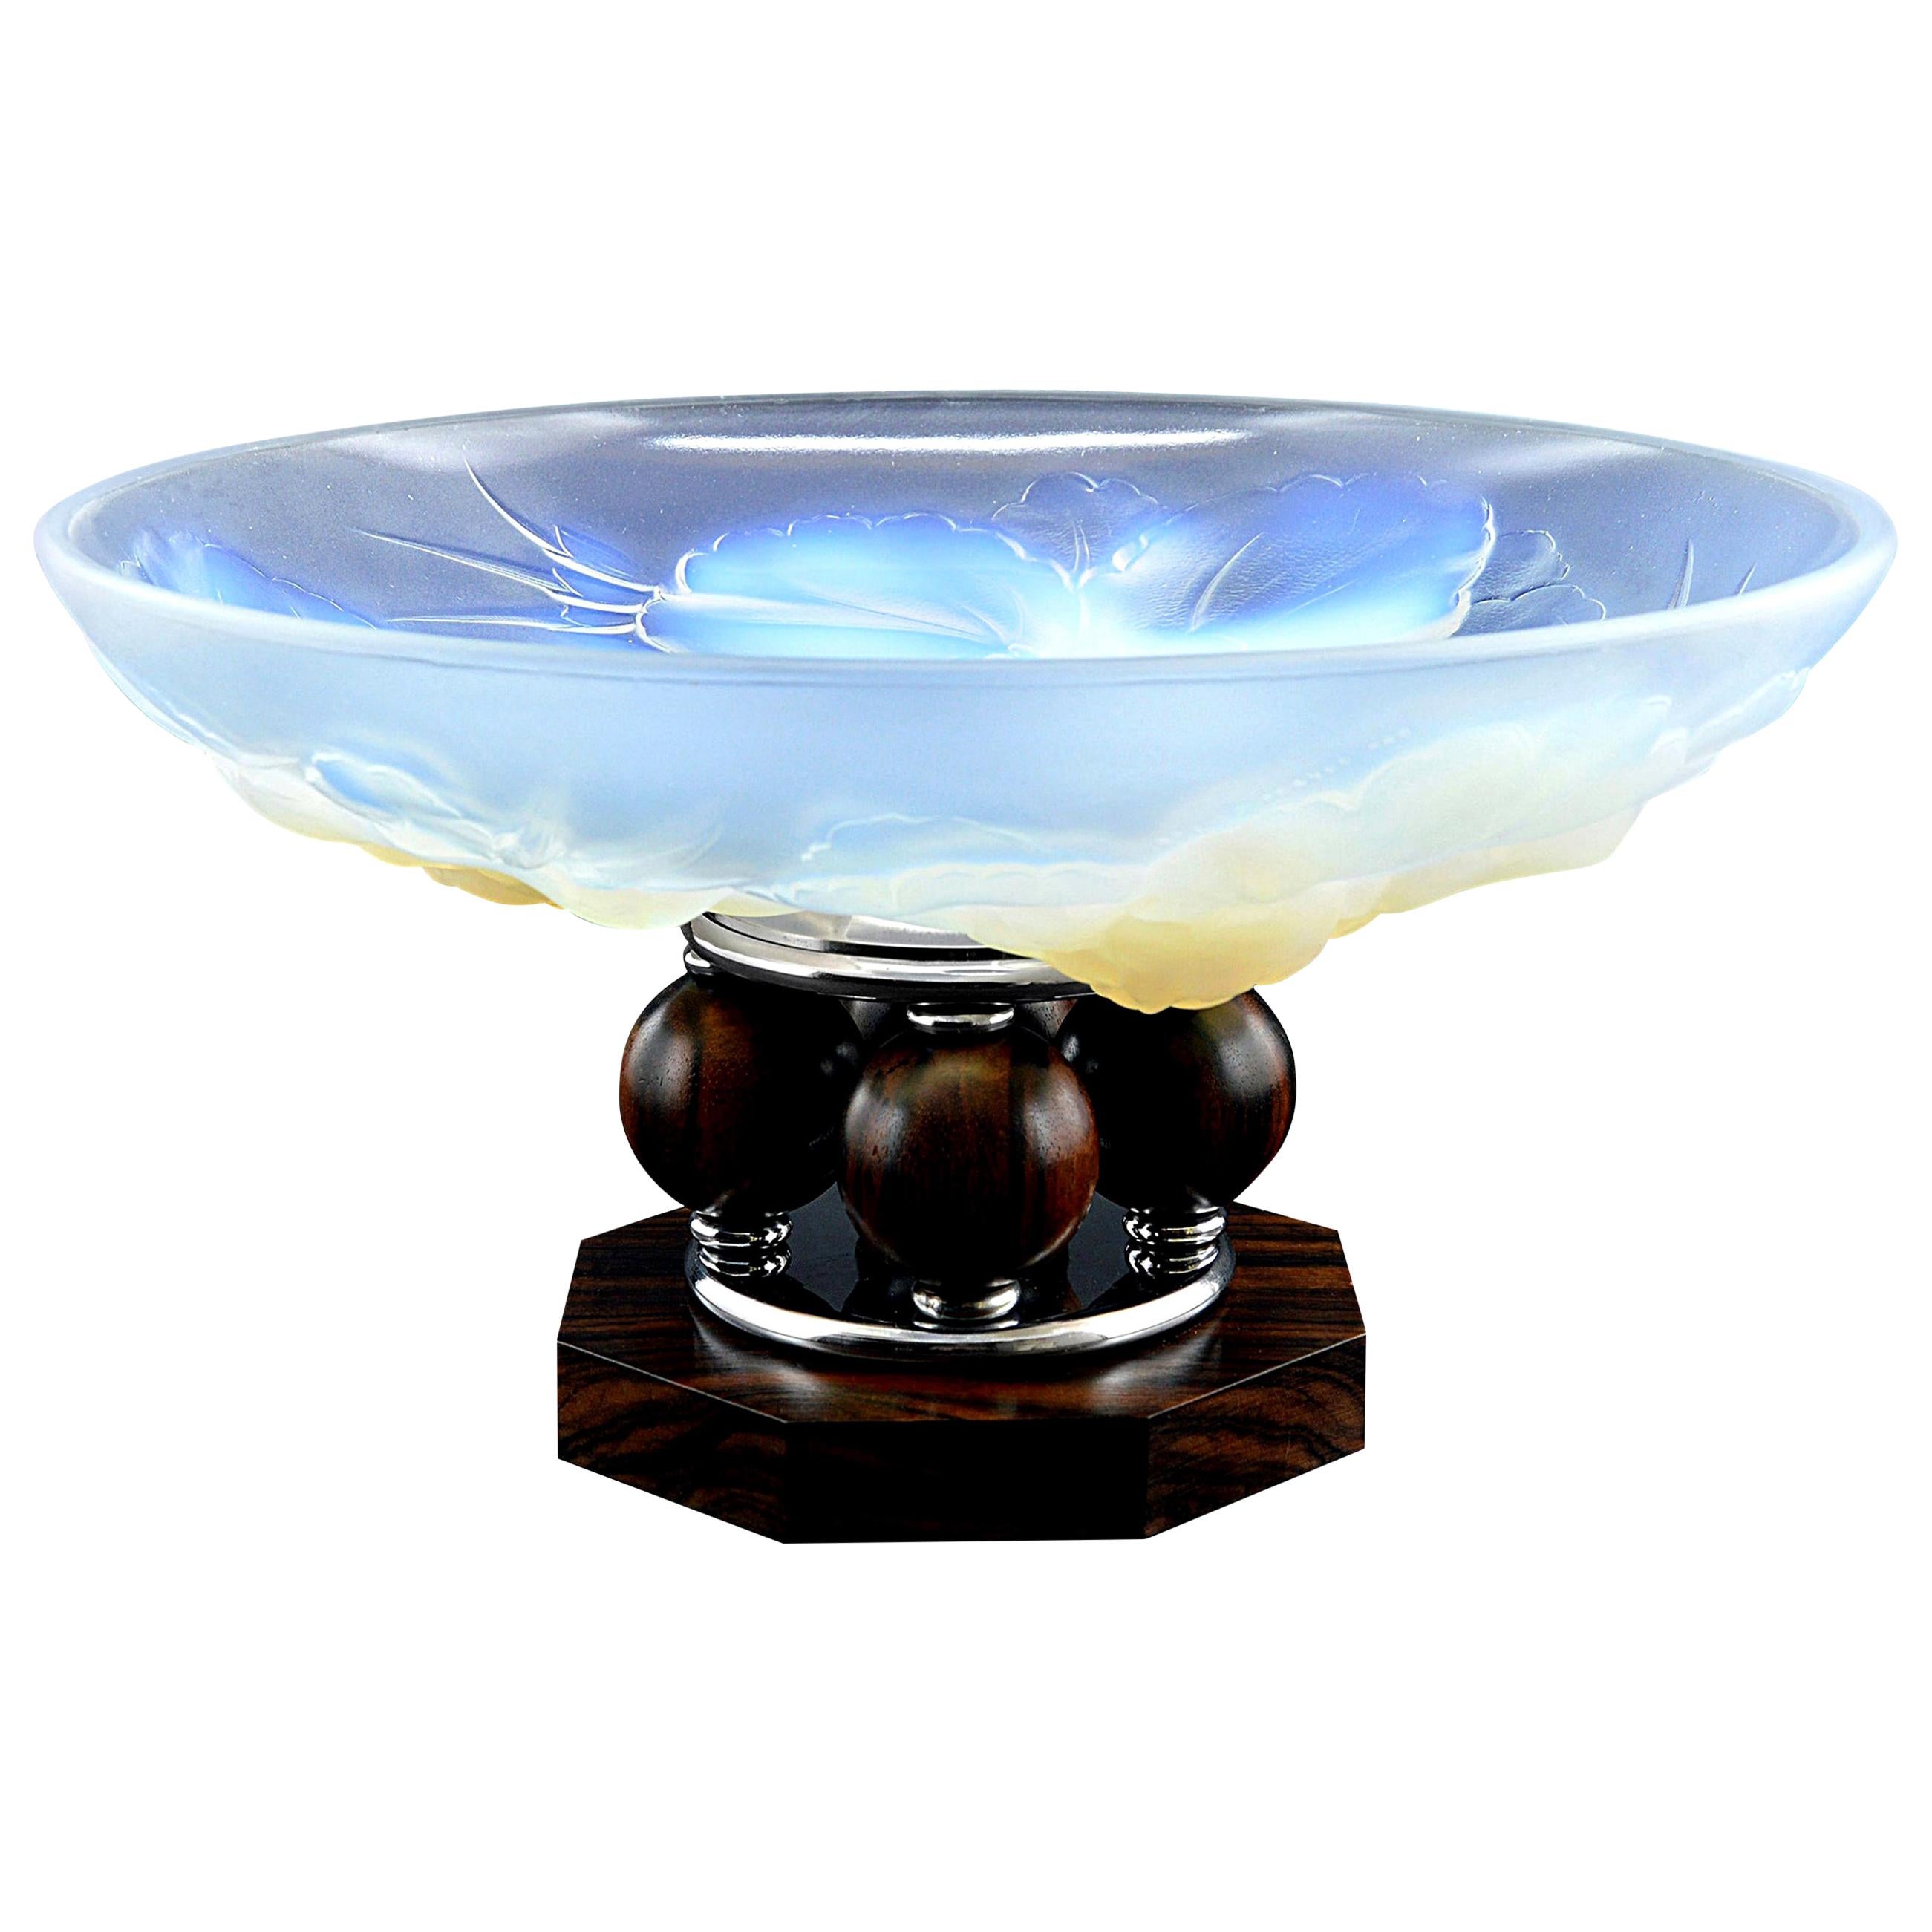 French Art Deco Opalescent Glass Center Bowl, 1930s